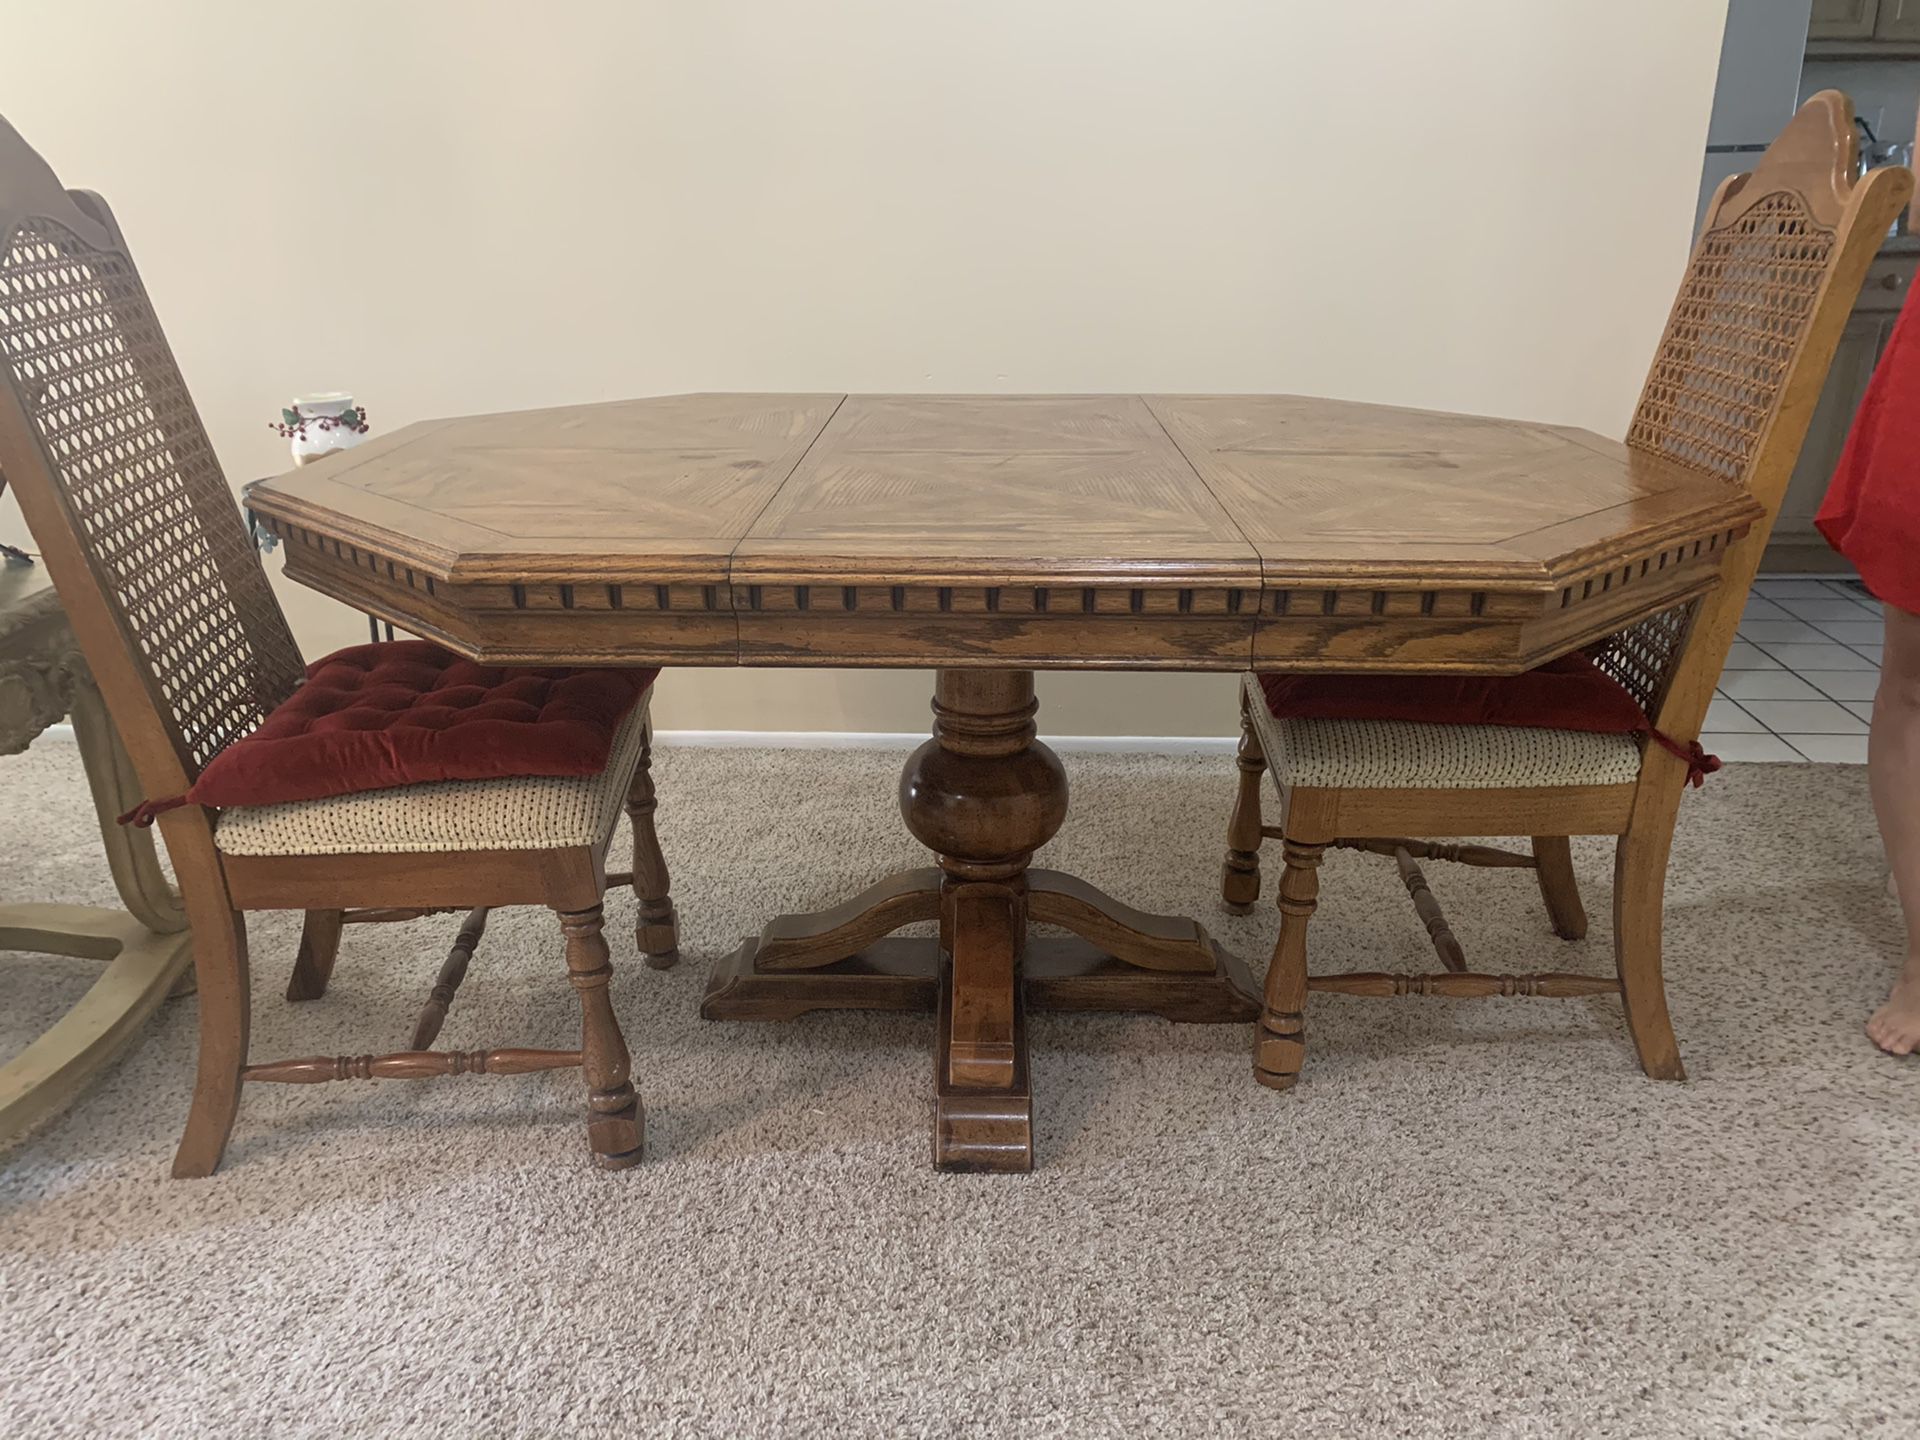 Wooden table with two chairs